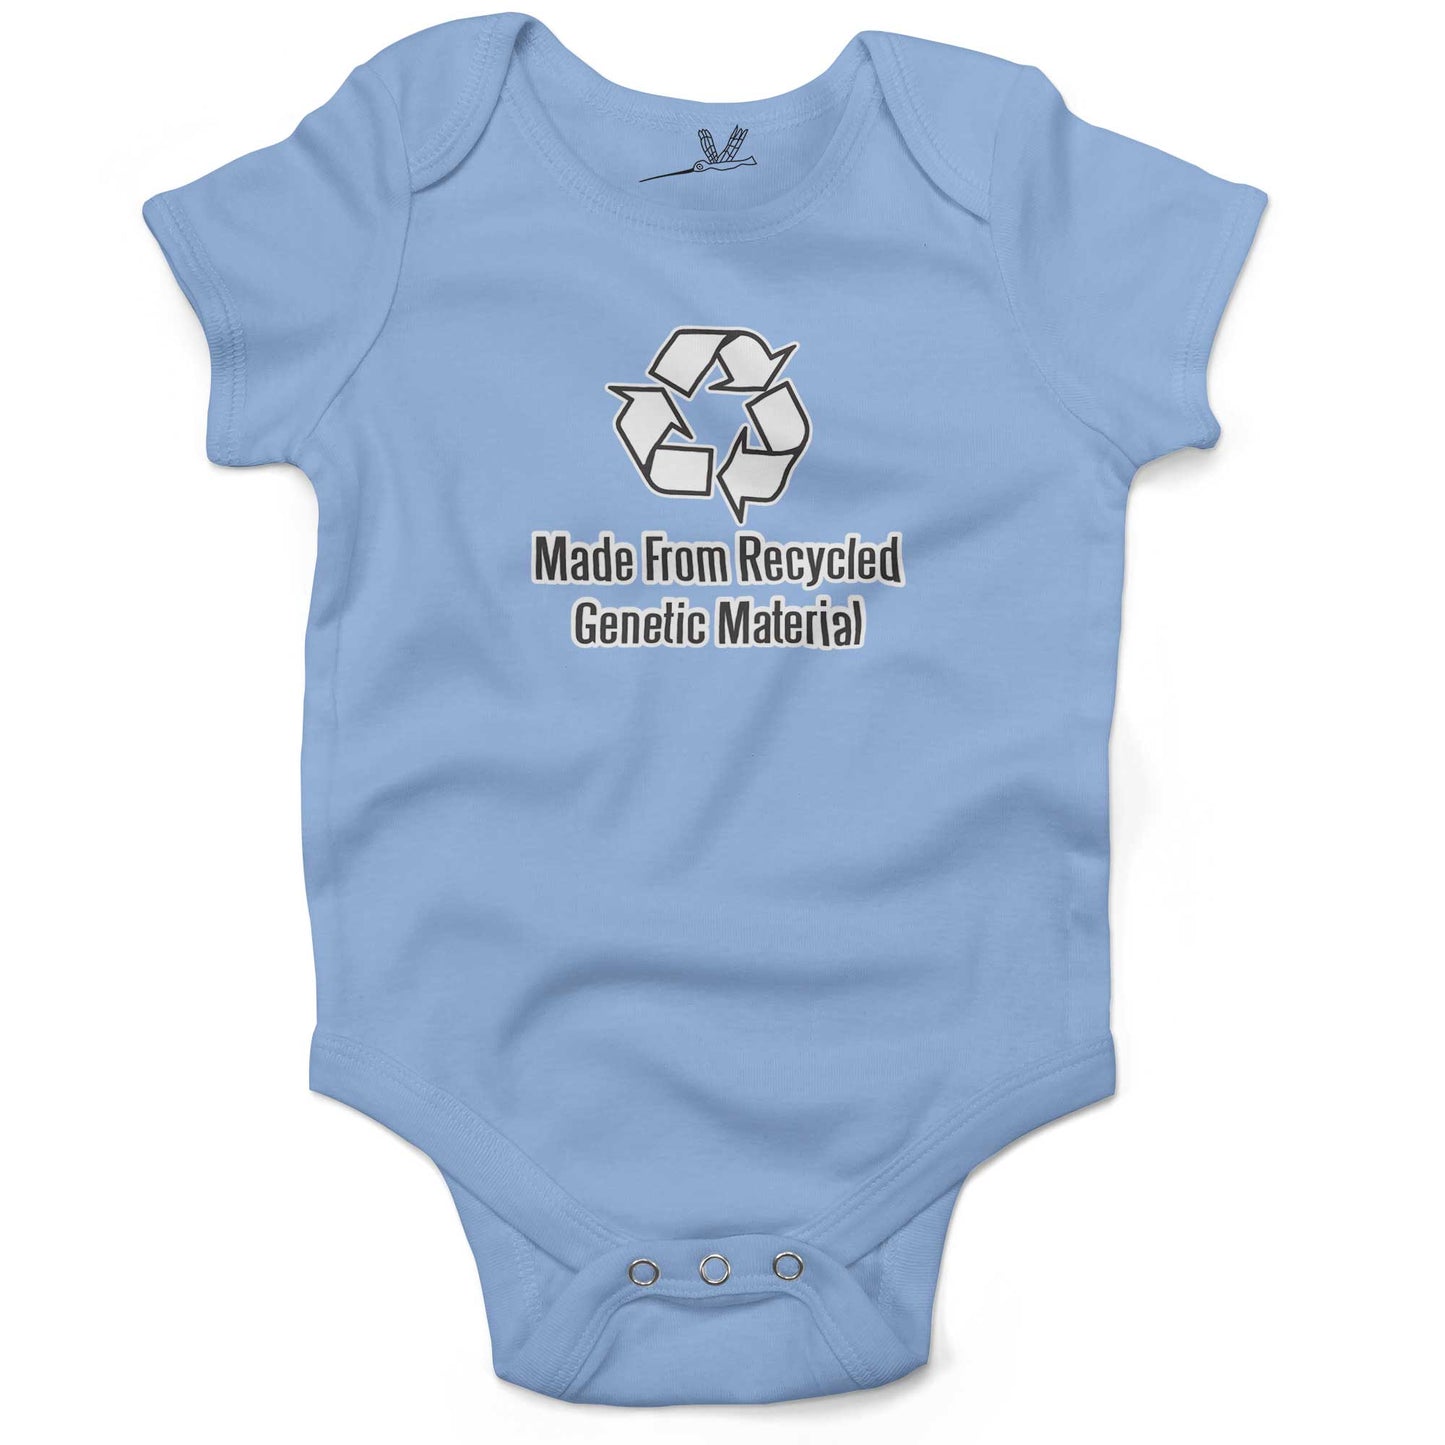 Made From Recycled Materials Infant Bodysuit or Raglan Baby Tee-Organic Baby Blue-3-6 months